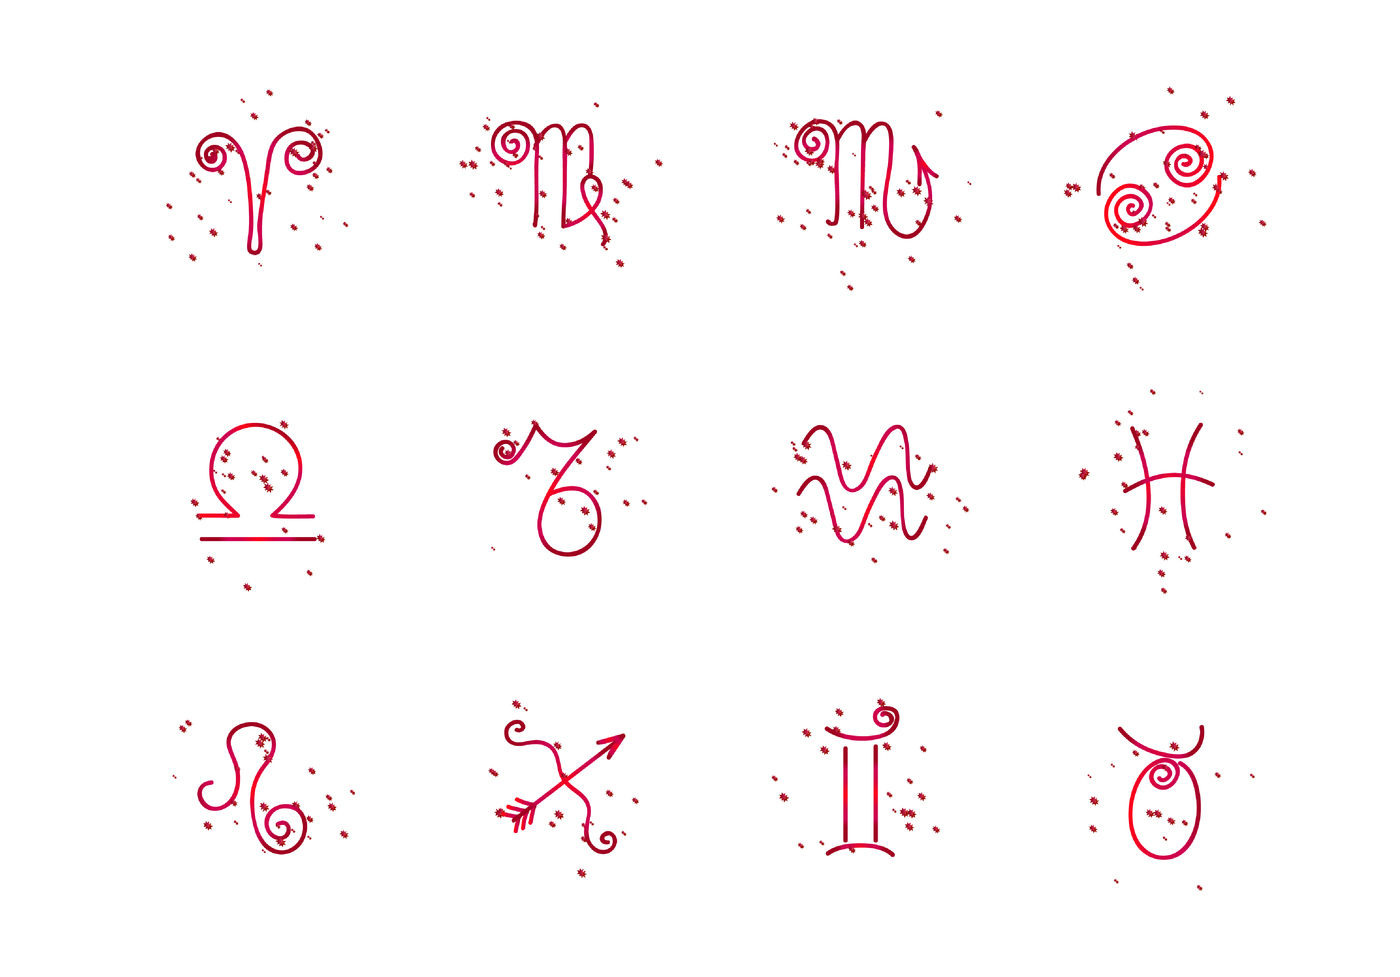 Set of icons of signs of zodiac. The image can be used for print, online,  and in any size of excellent quality. The archive contains 2 - EPS 10, 5 -  PNG